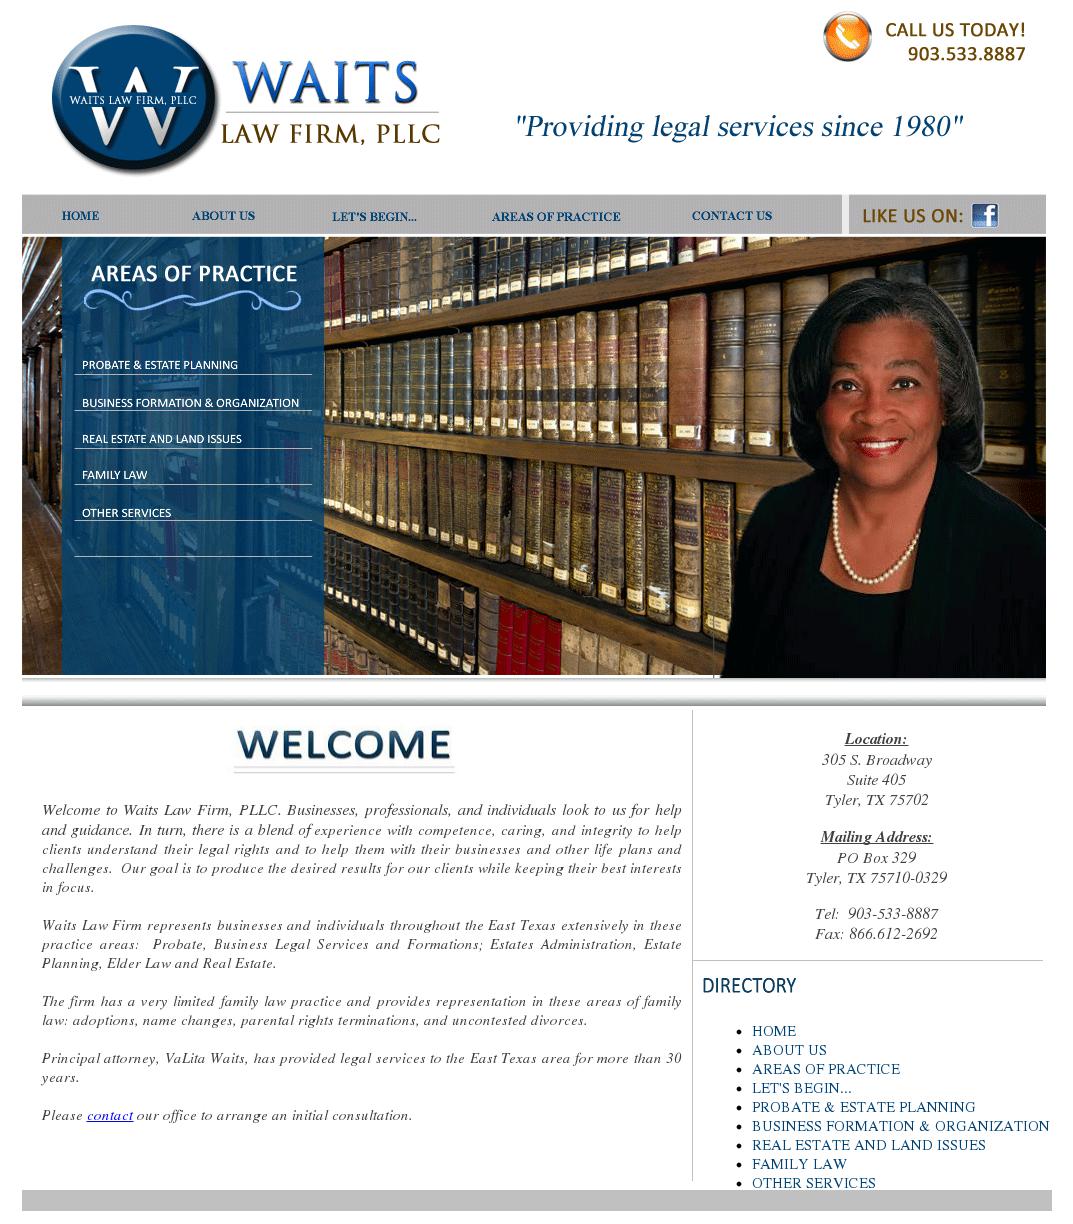 Waits Law Firm PLLC - Tyler TX Lawyers